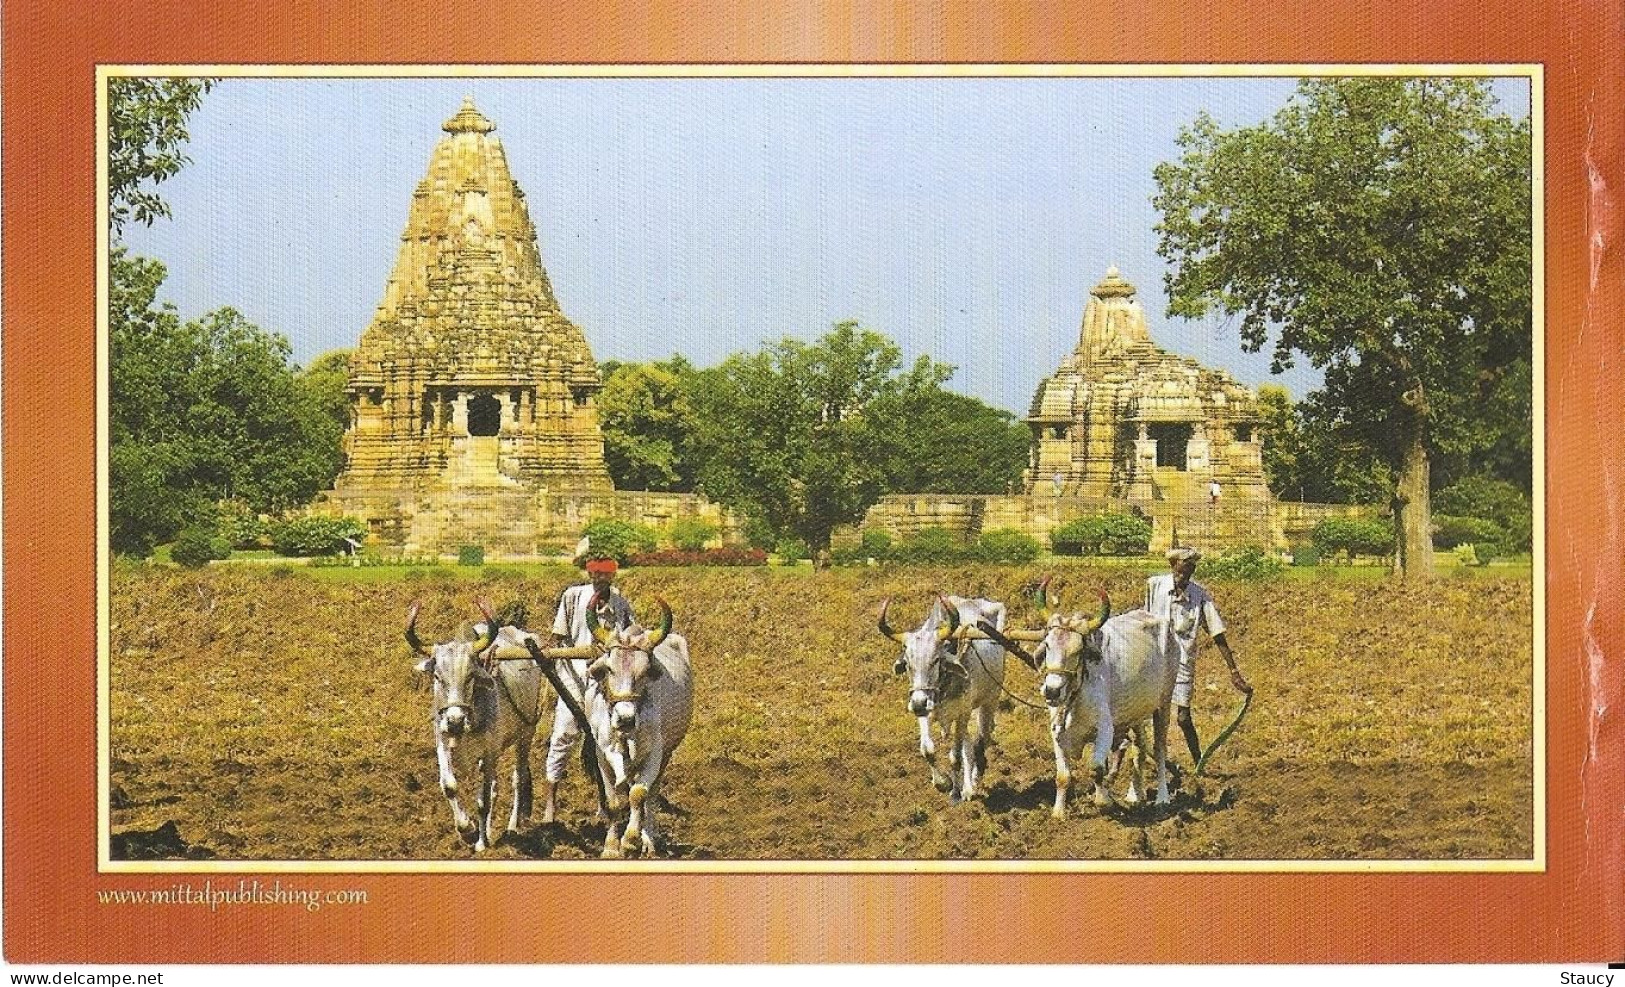 India Khajuraho Temples MONUMENTS - WESTERN GROUP Temples Group Picture Post CARD New As Per Scan - Ethnics